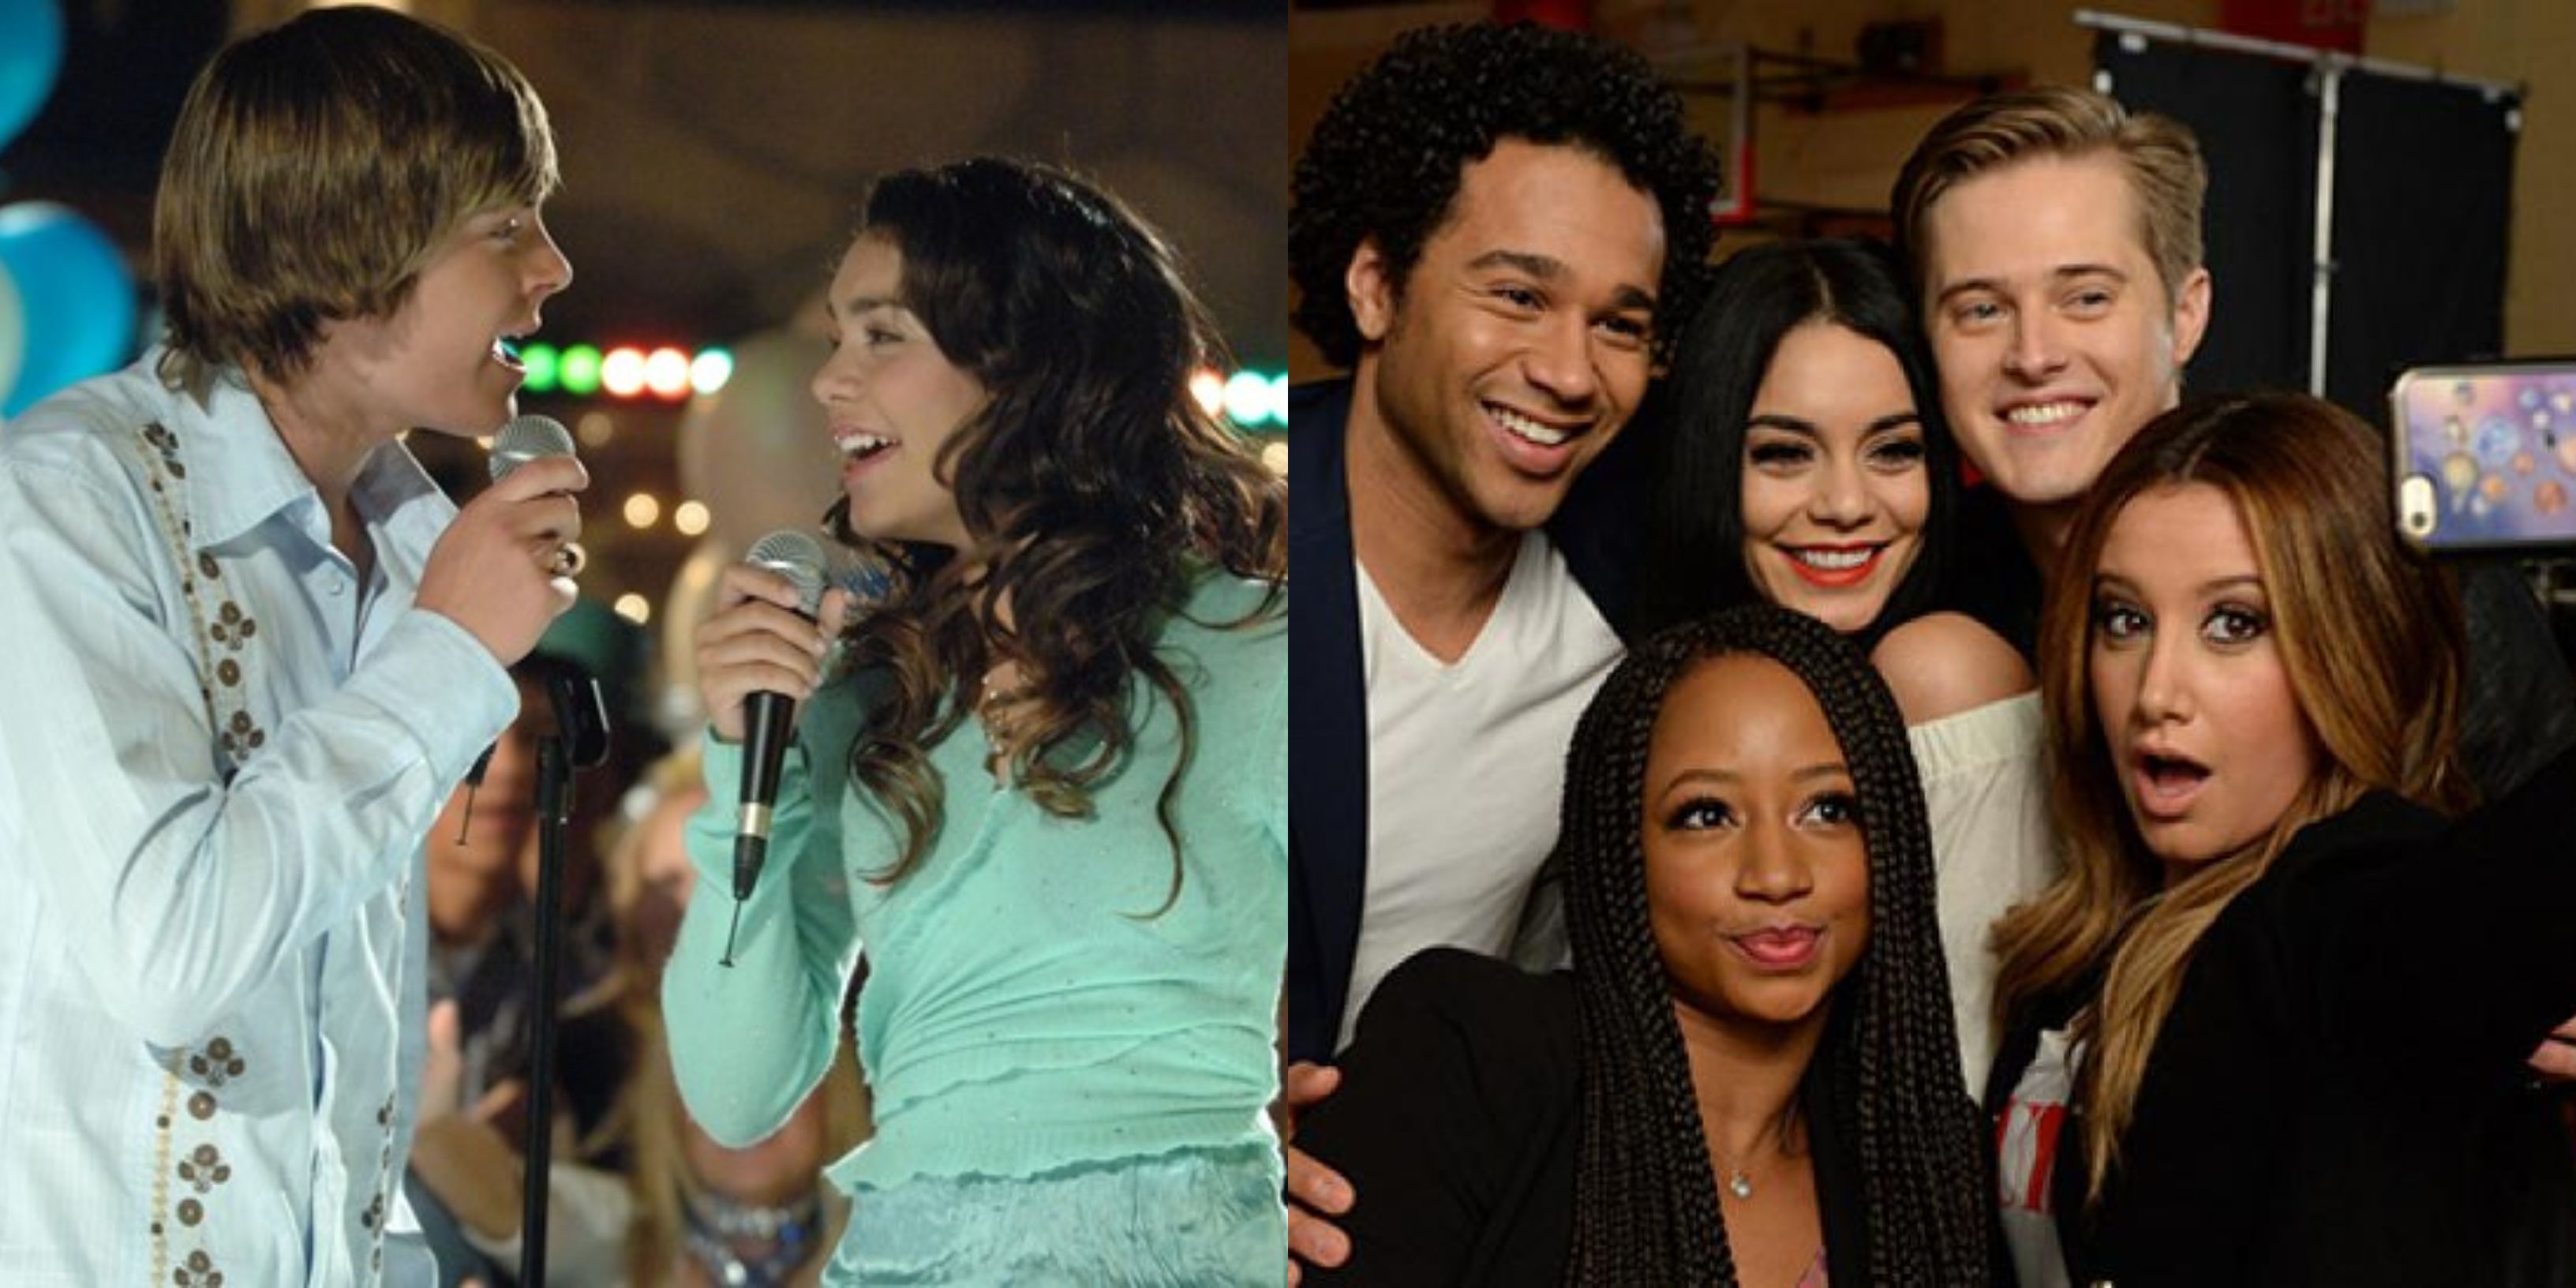 The Cast of 'High School Musical': Where Are They Now?